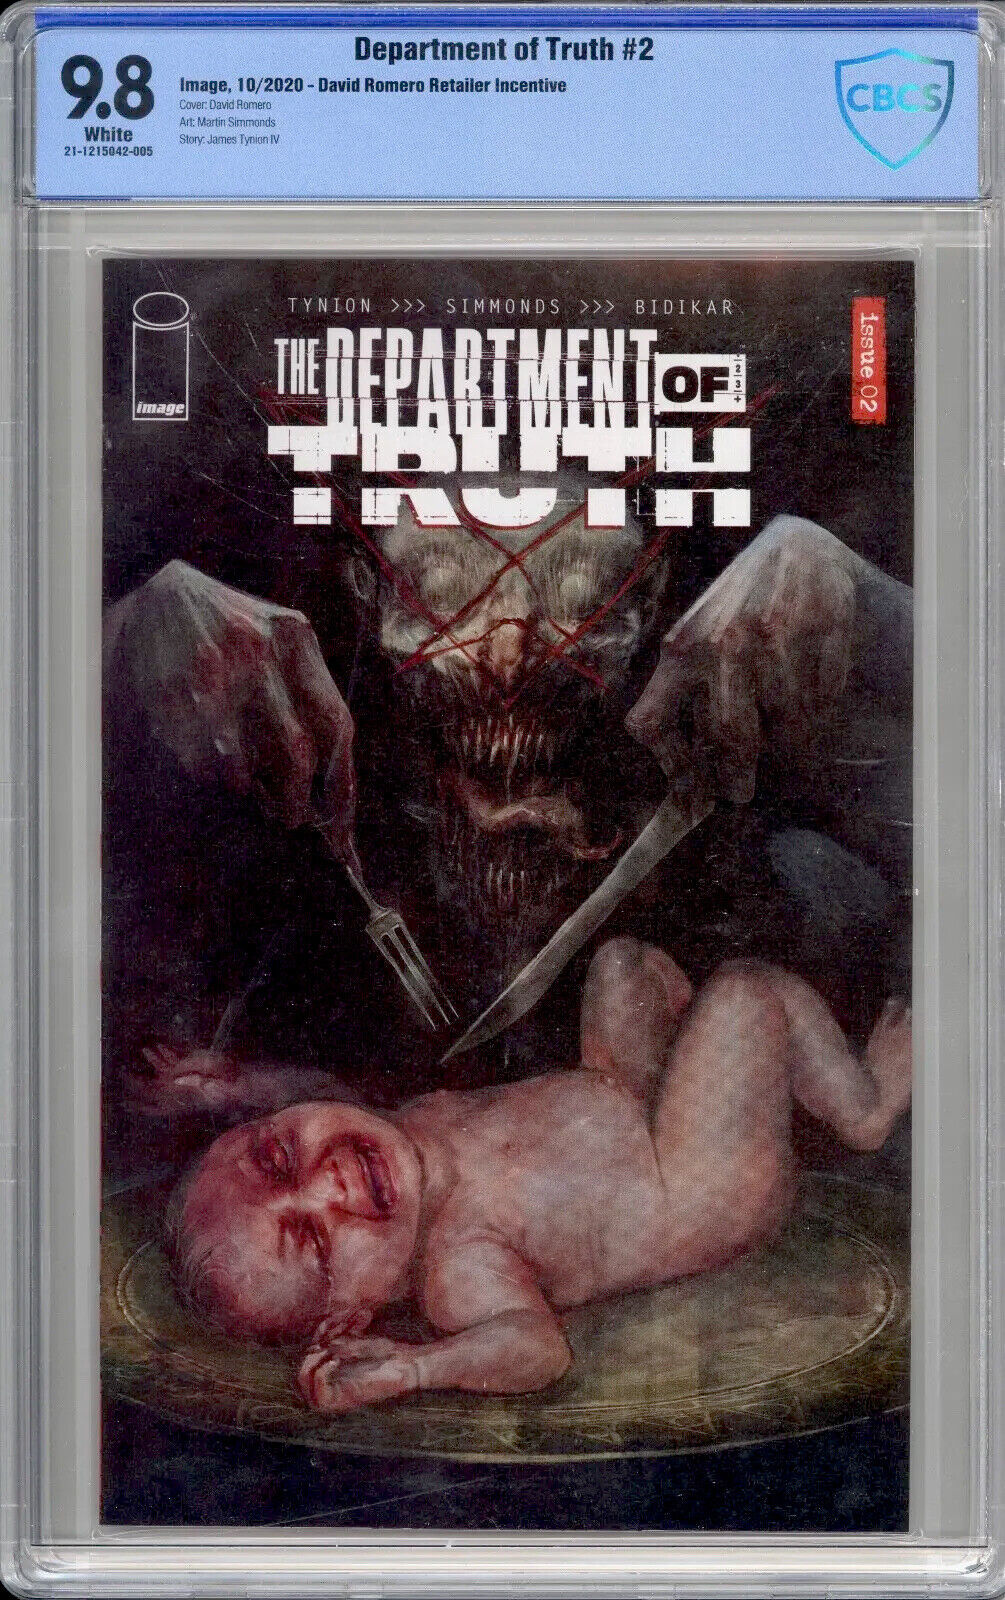 The Department of Truth 2 David Romero Retailer Incentive "Baby Eater" 9.8